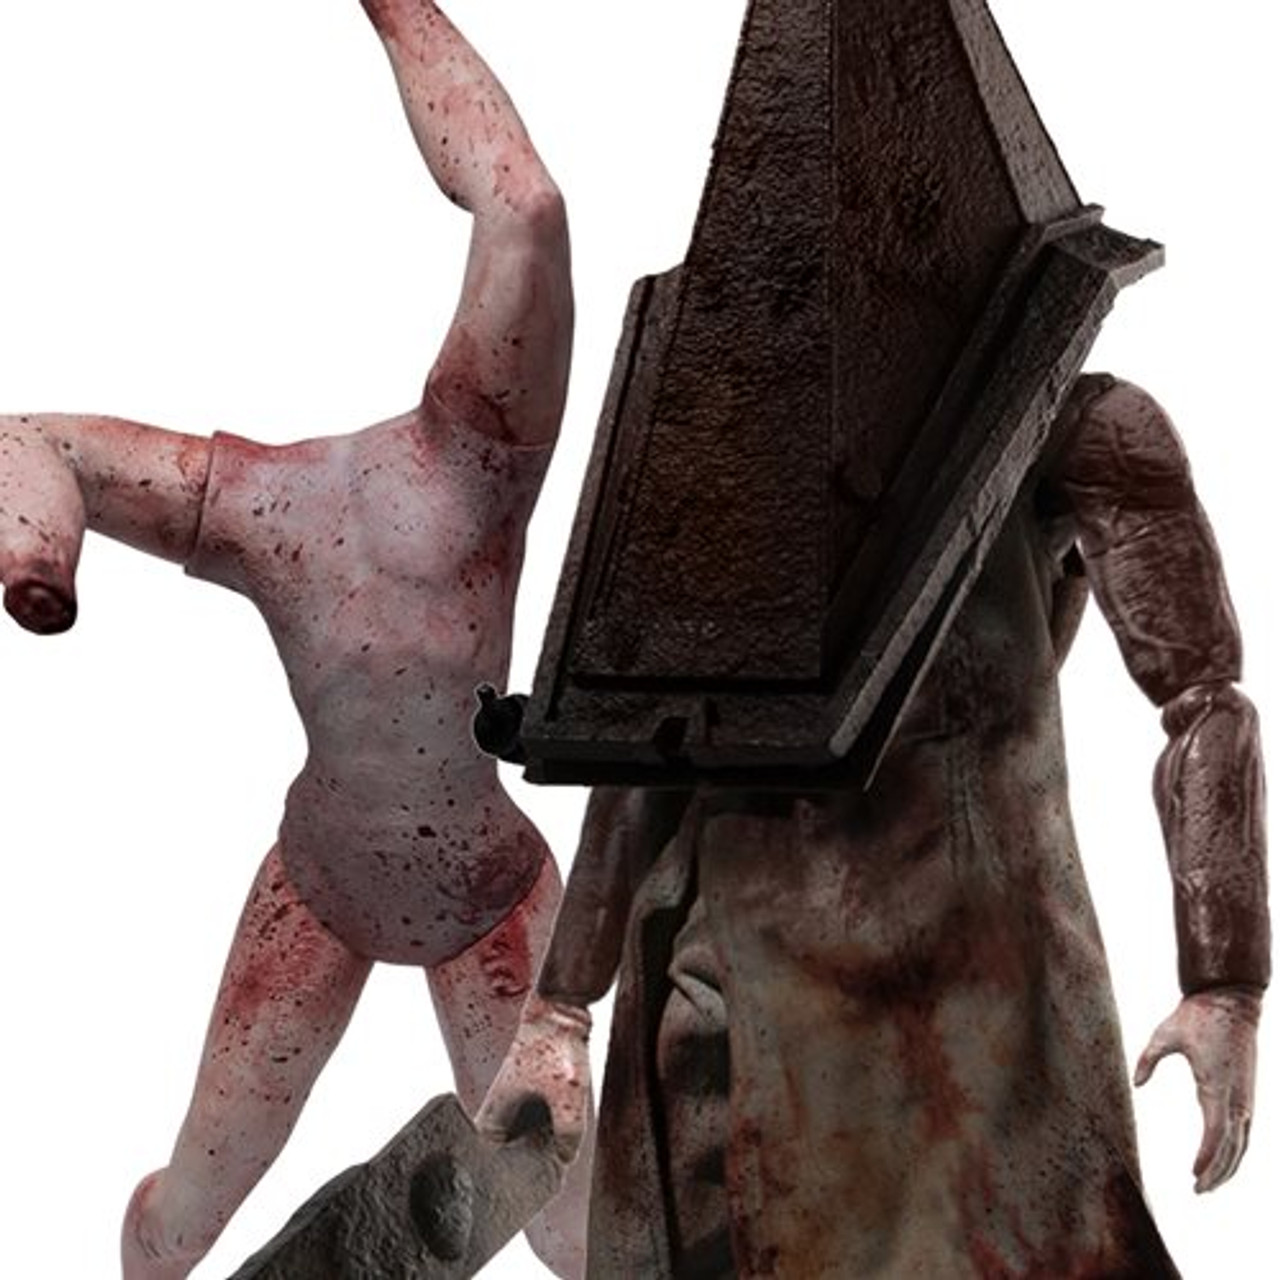 One:12 Collective Silent Hill 2: Red Pyramid Thing